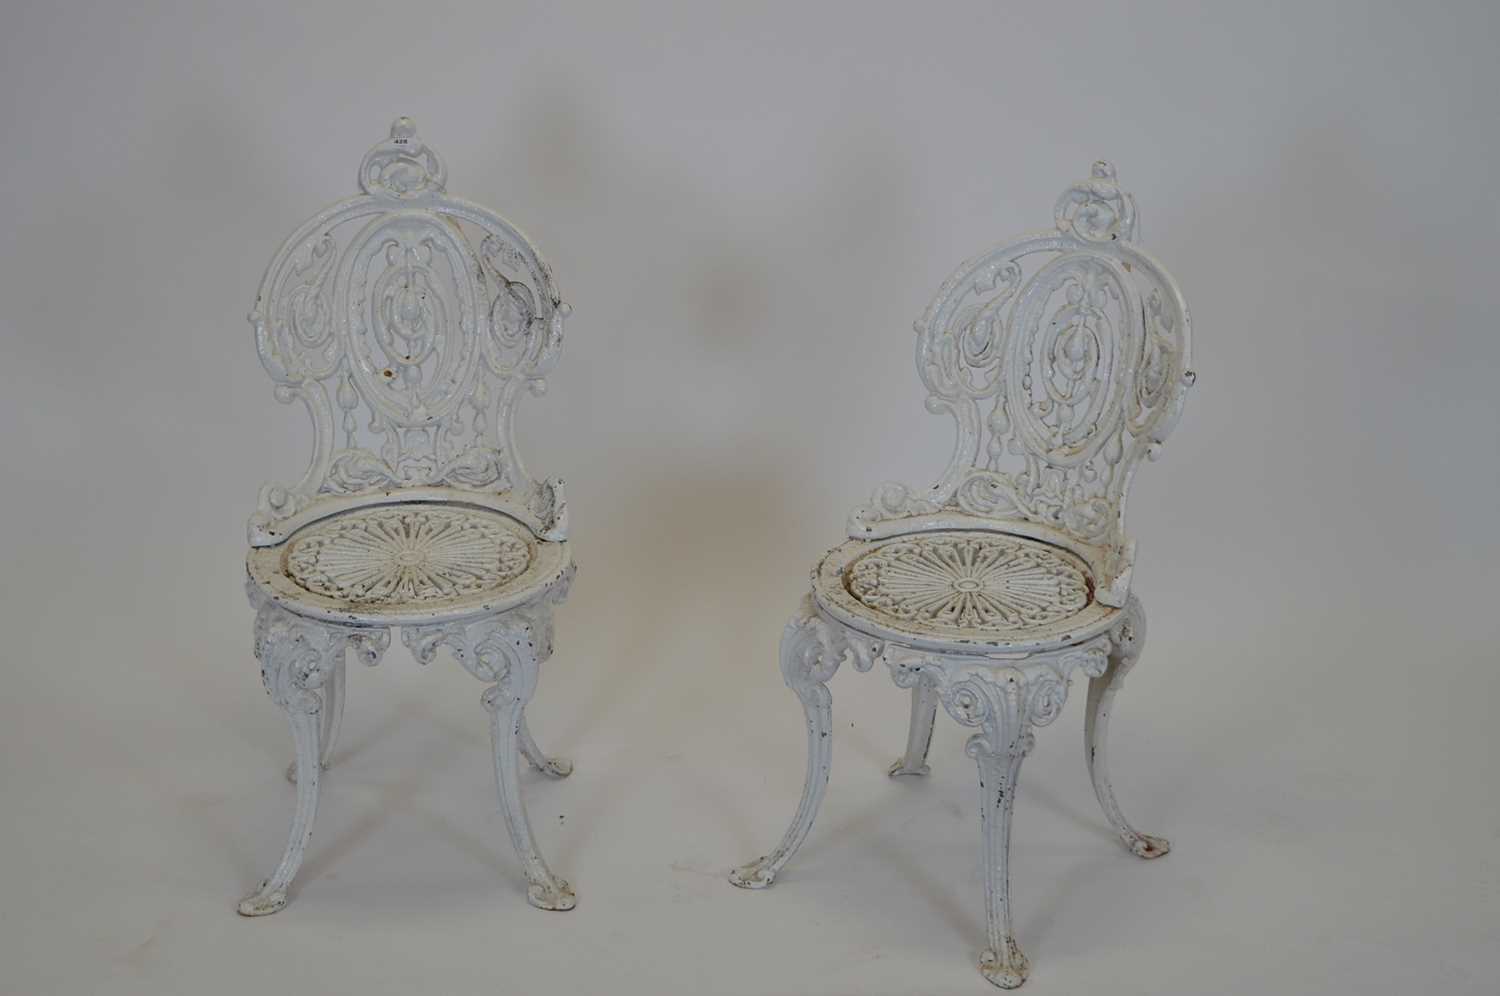 Lot 428 - Pair of early 20th century garden seats